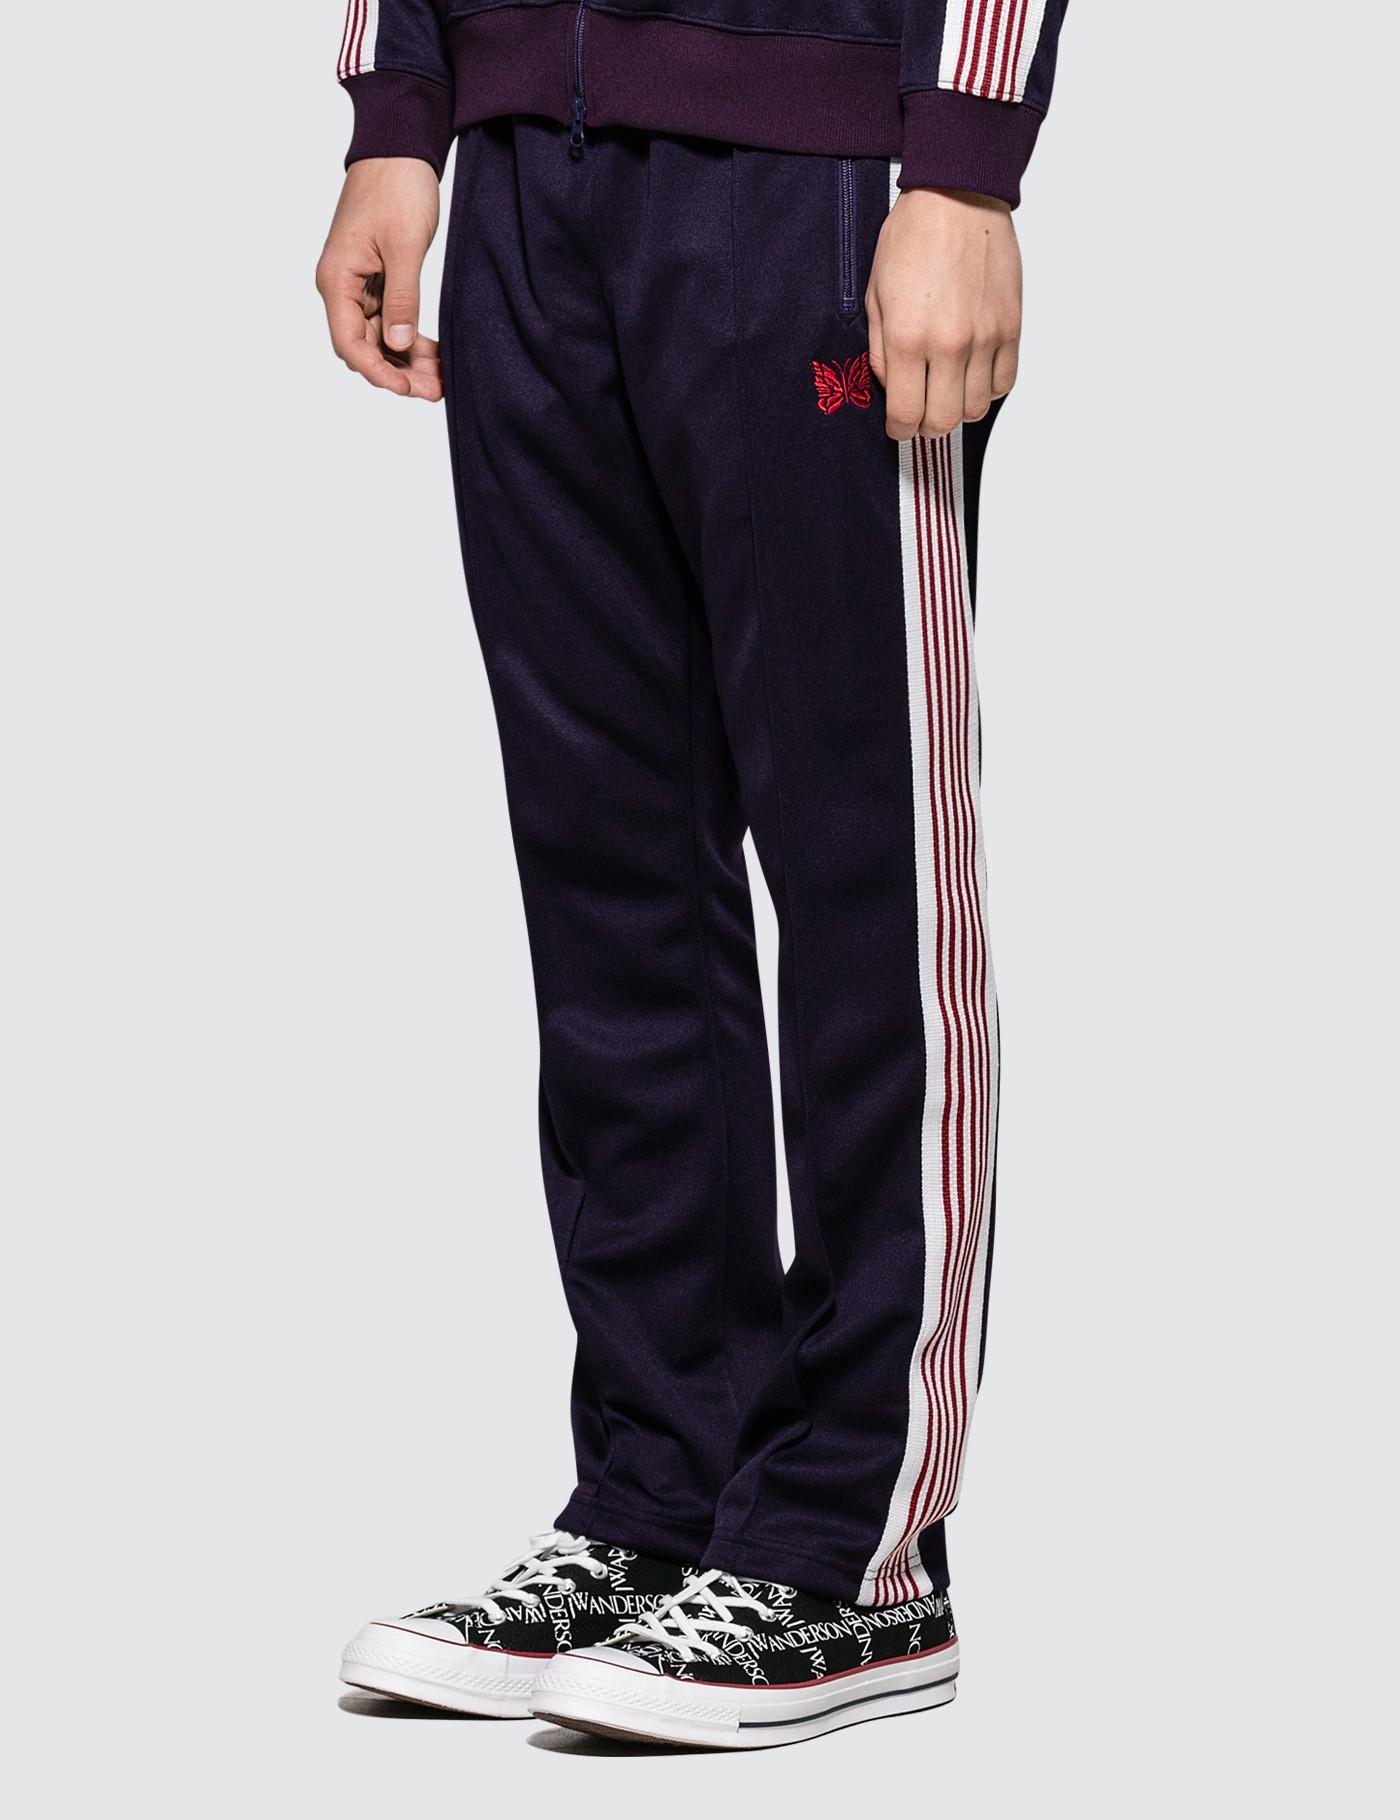 Needles Synthetic Narrow Track Pants in Purple for Men - Lyst